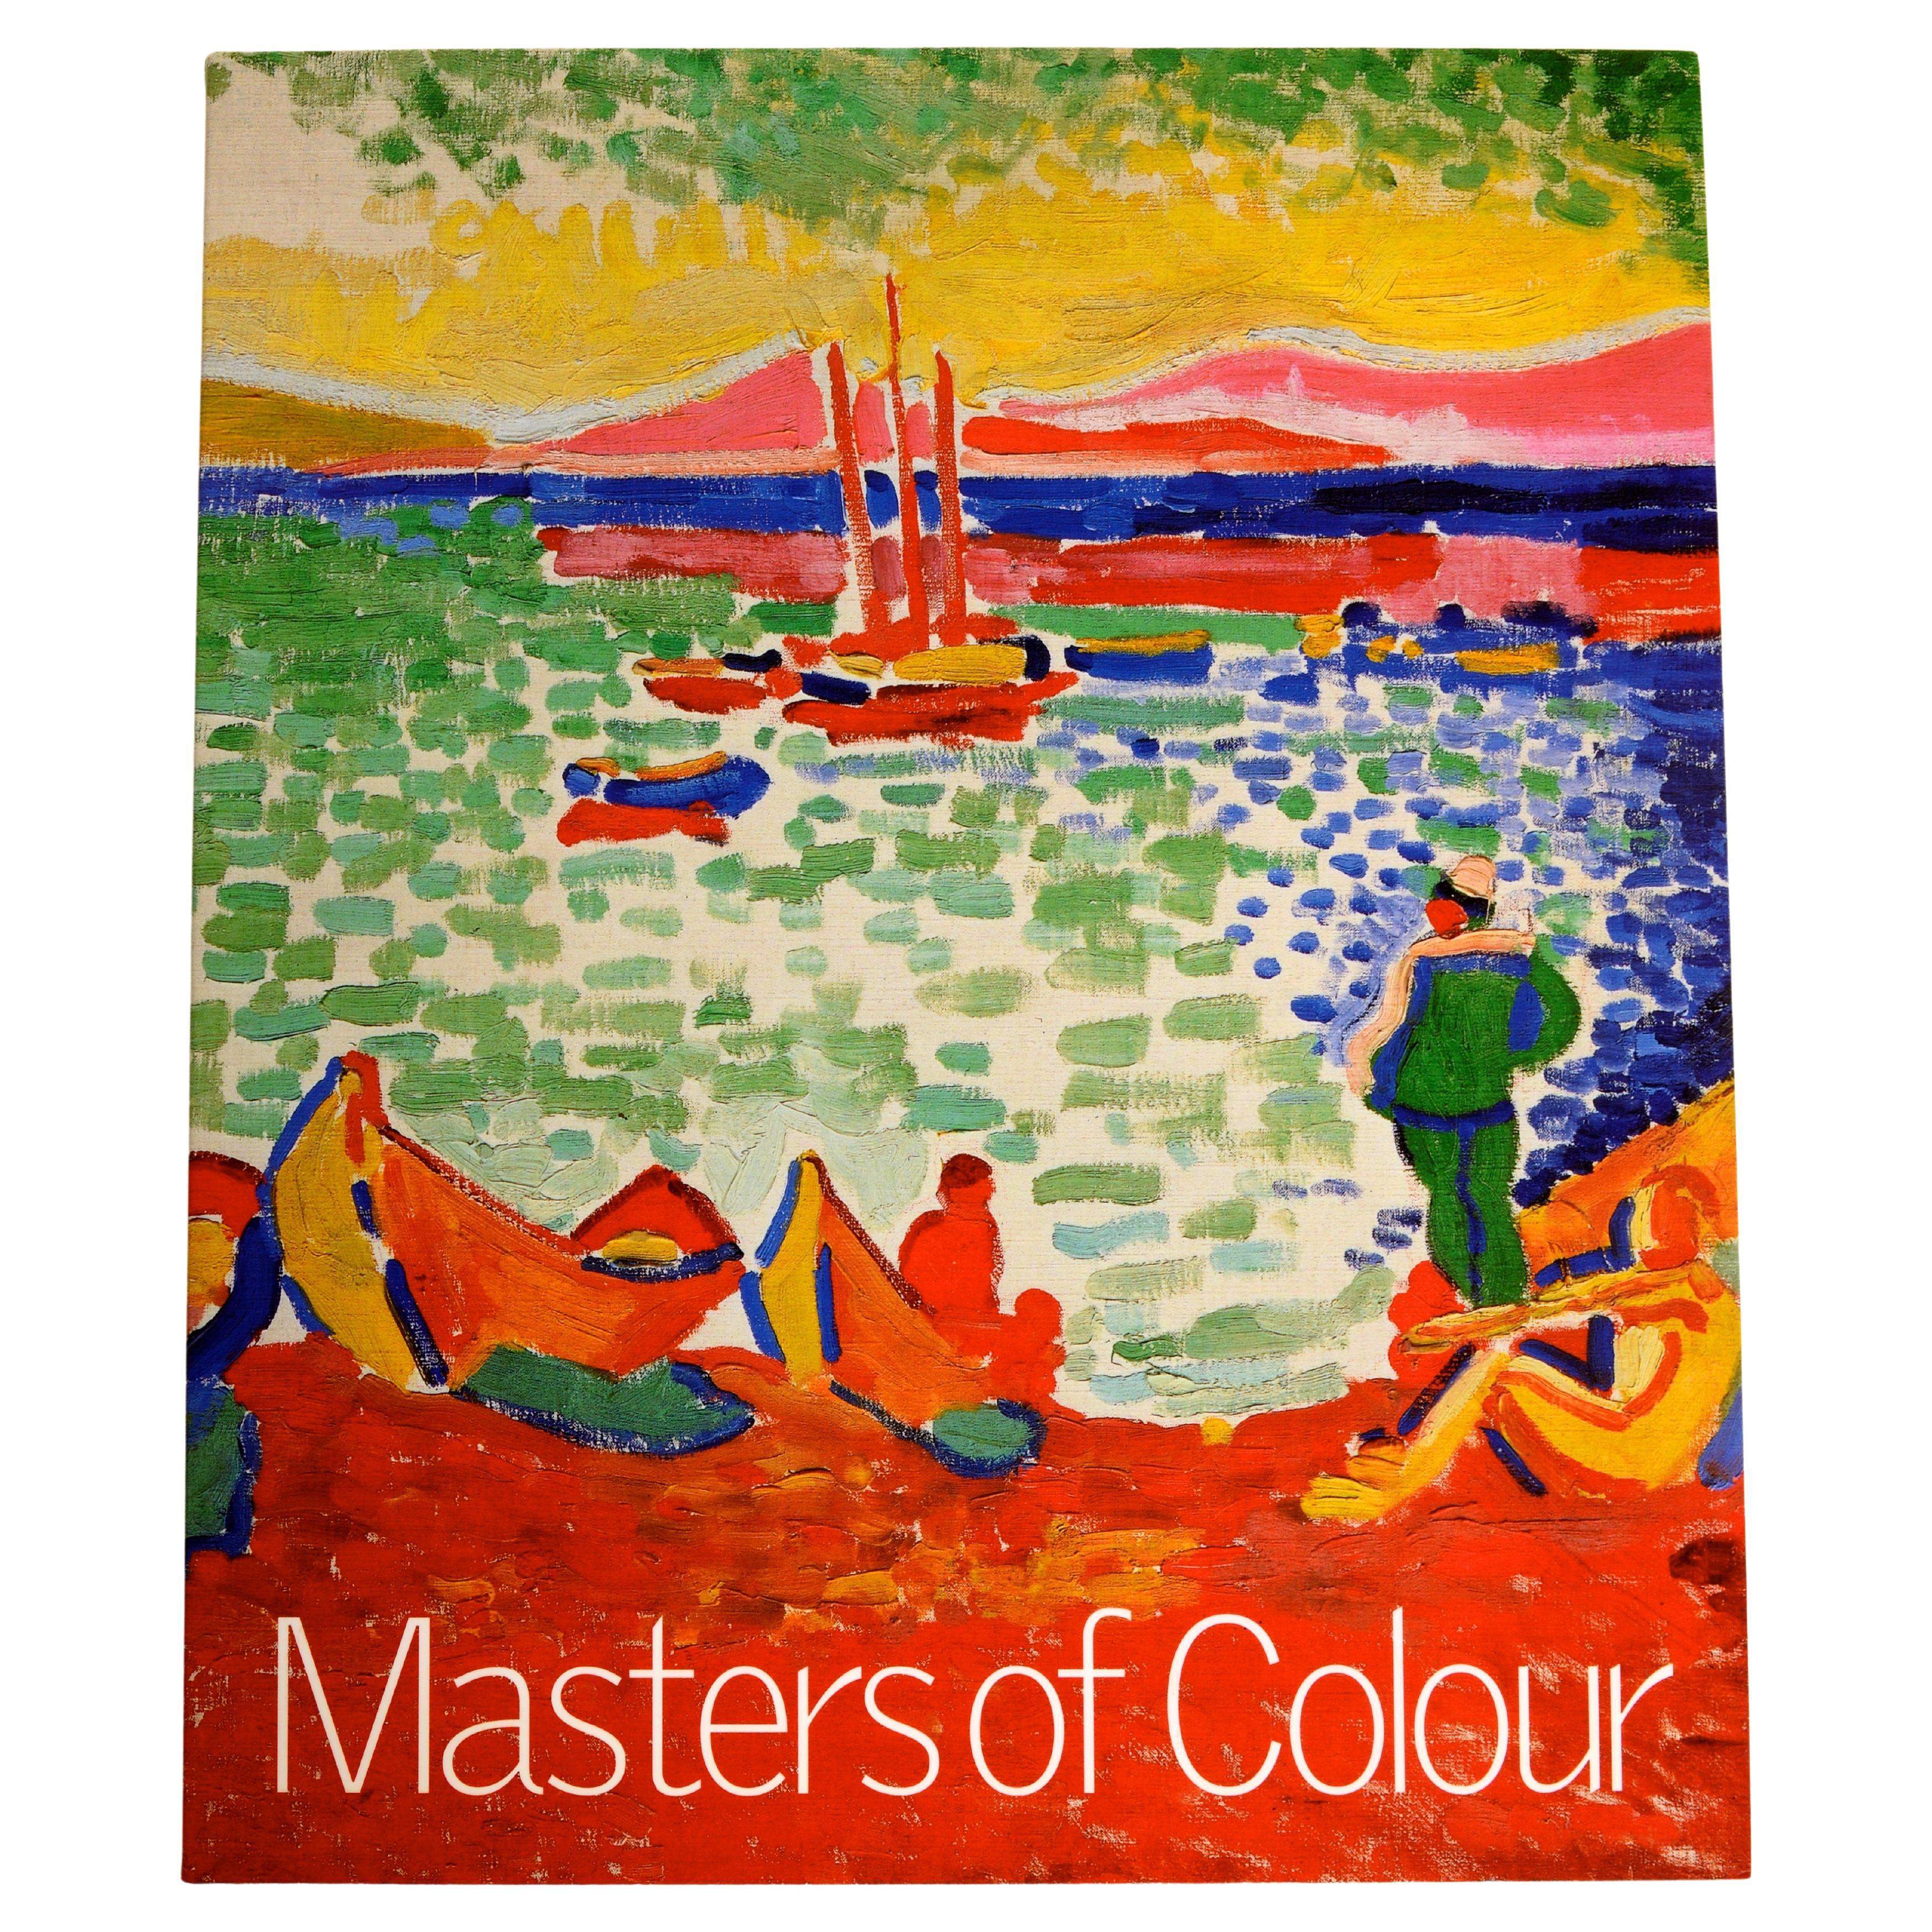 Masters of Colour Derain to Kandinsky, Masterpieces from Merzbacher Collection